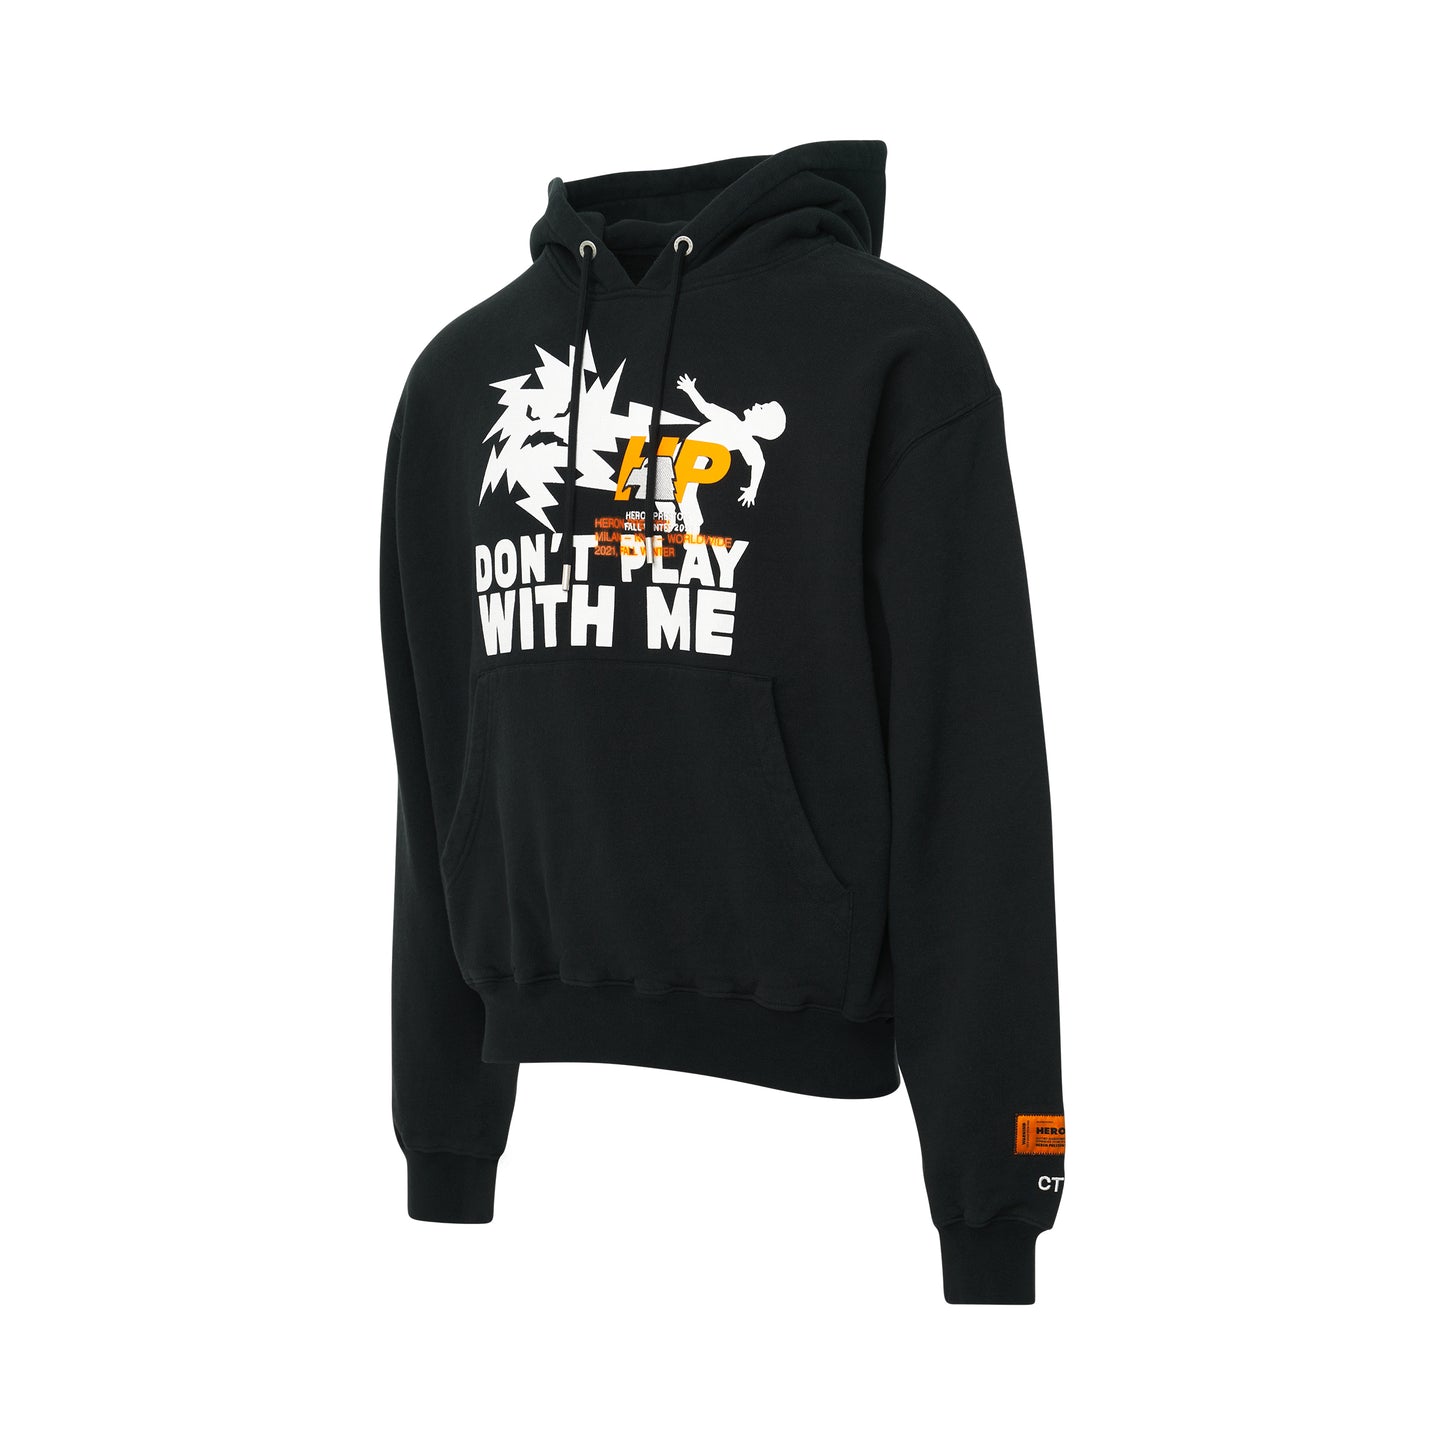 Do Not Play With Me Hoodie in Black